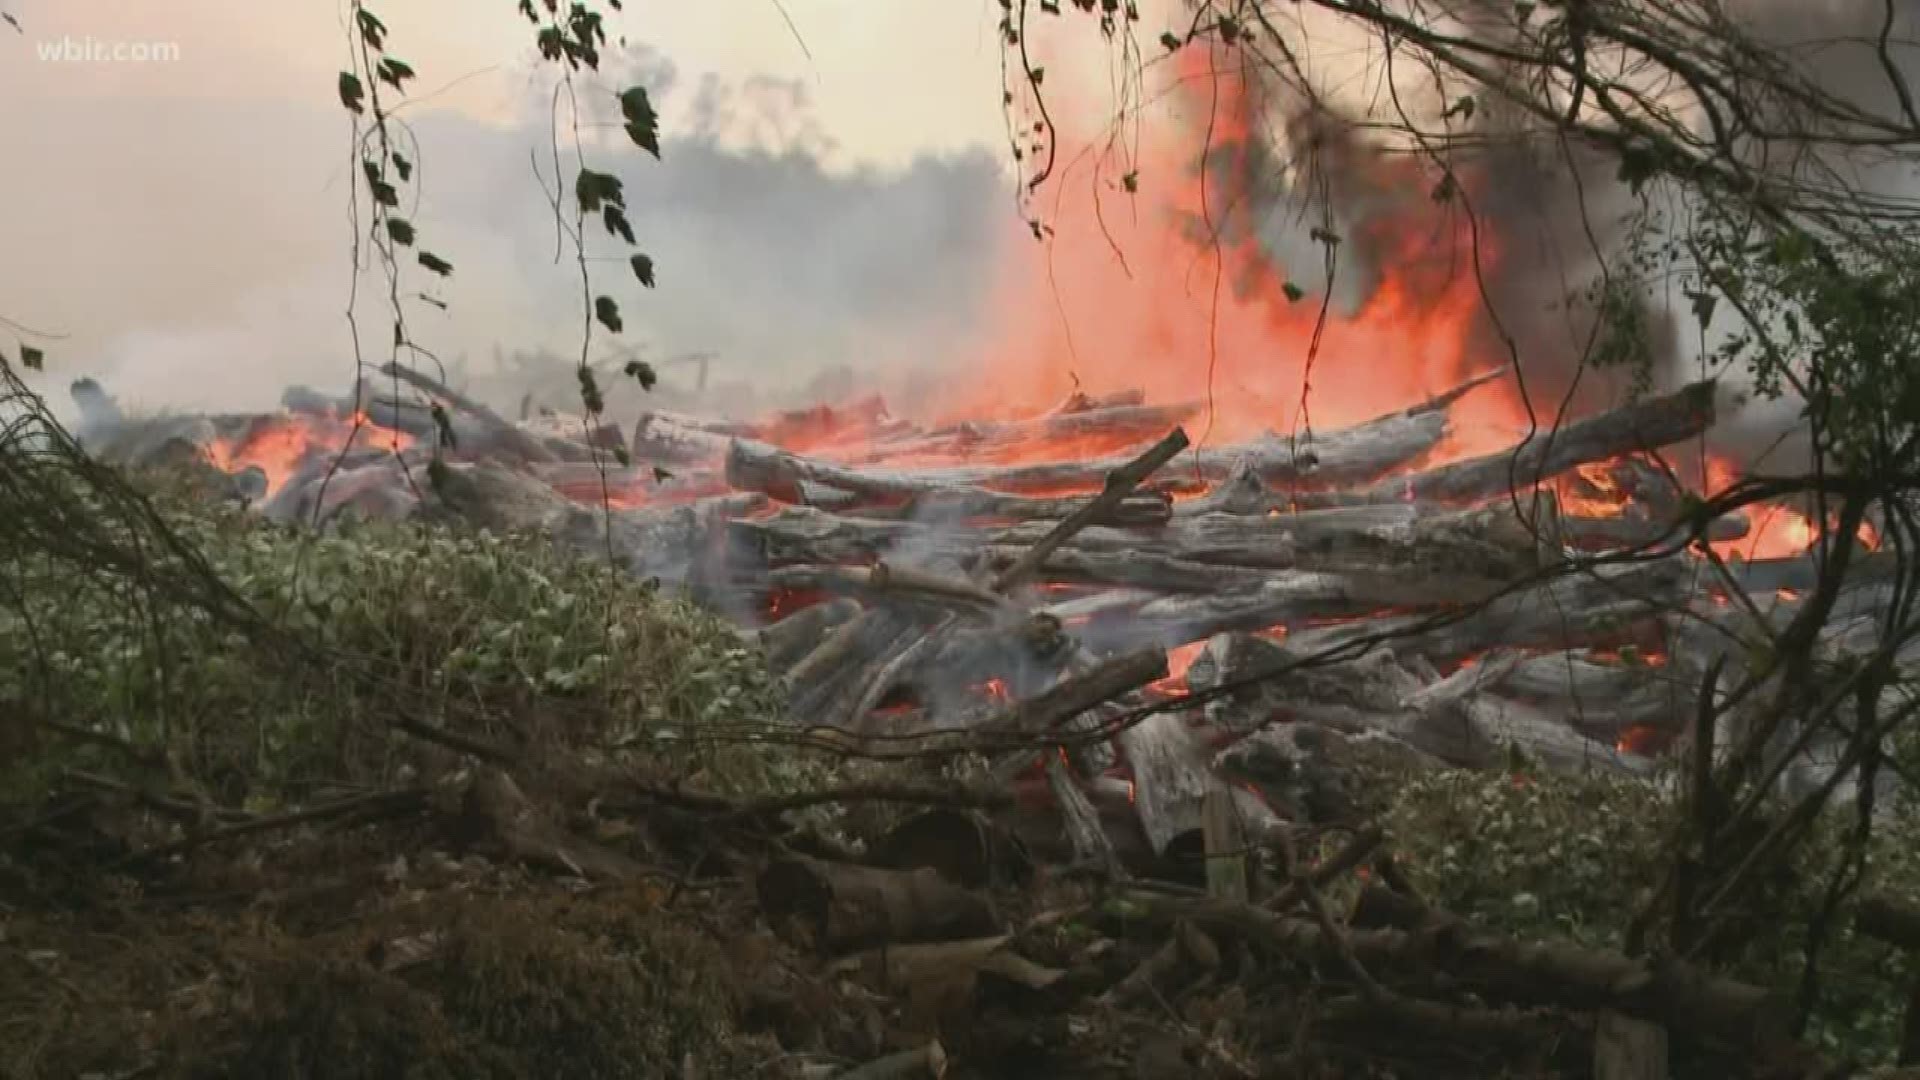 Authorities are warning the community just how quickly a fire can spread in this dry weather.